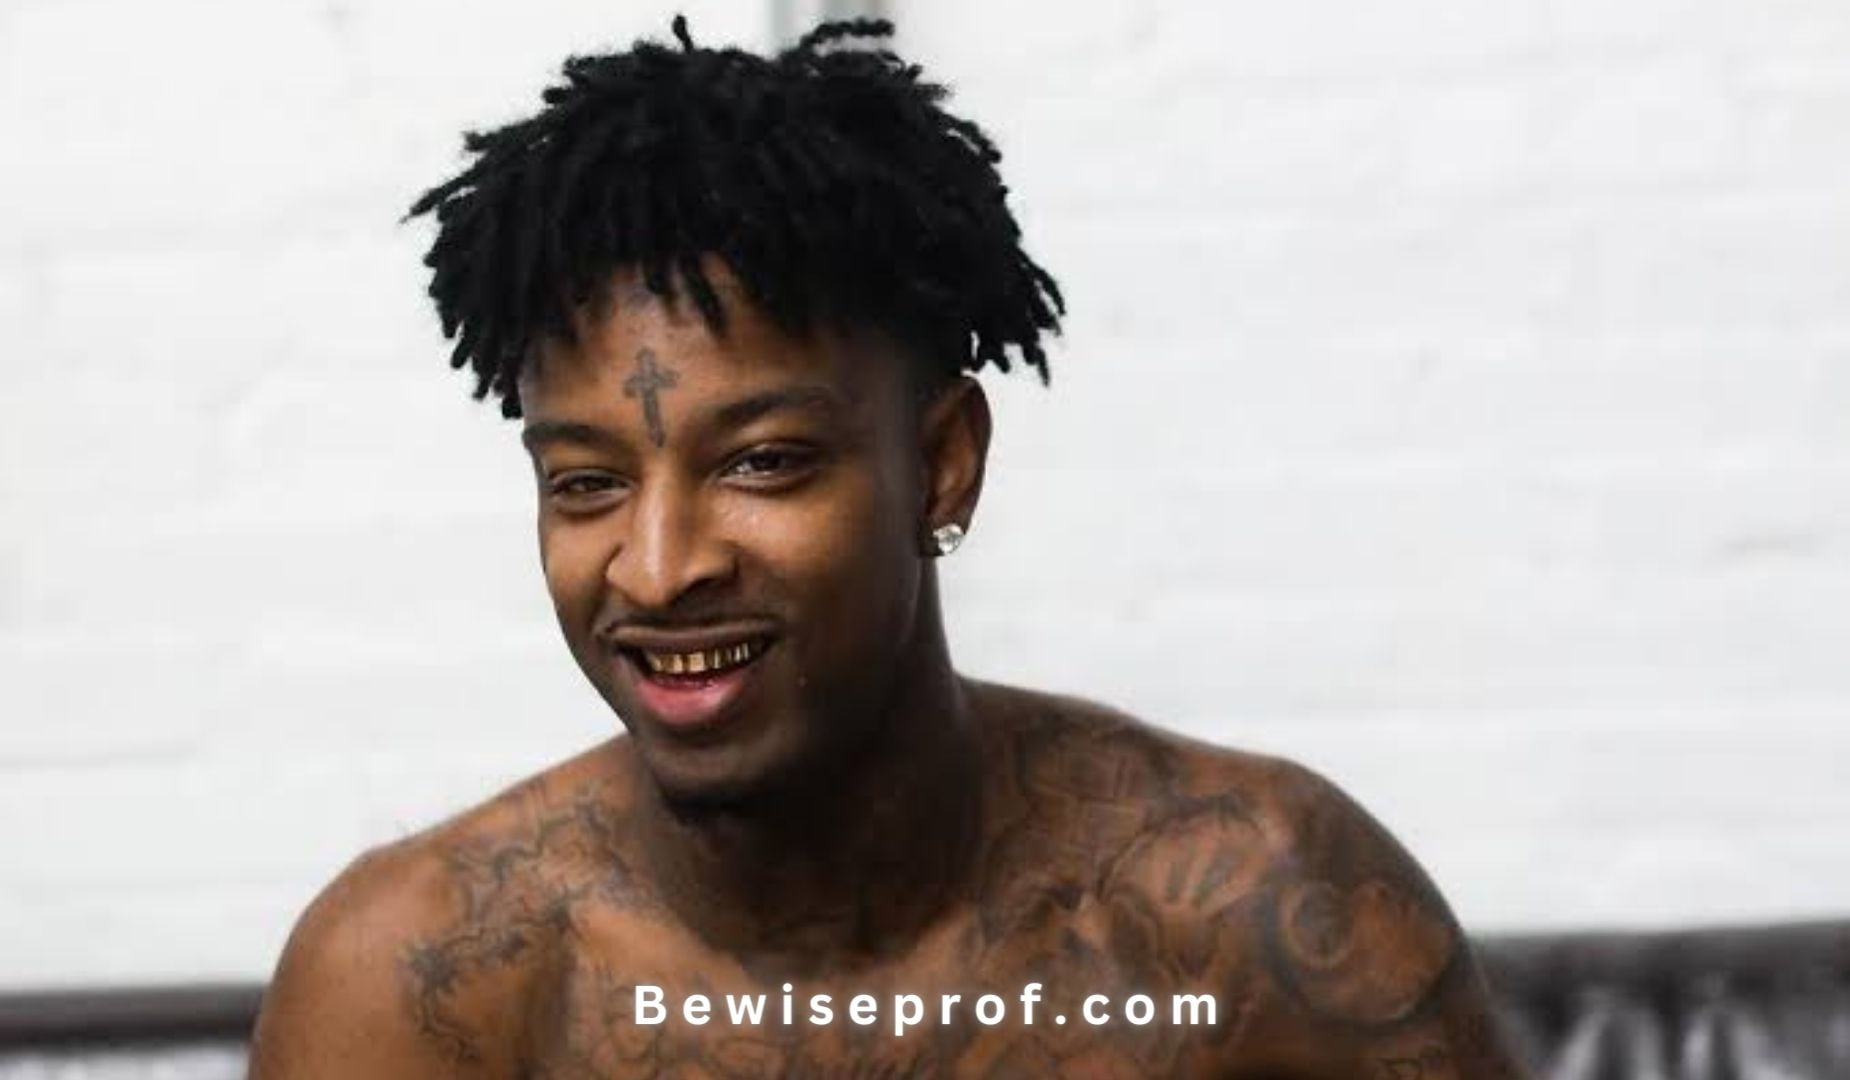 How Many Kids Does 21 Savage Have?